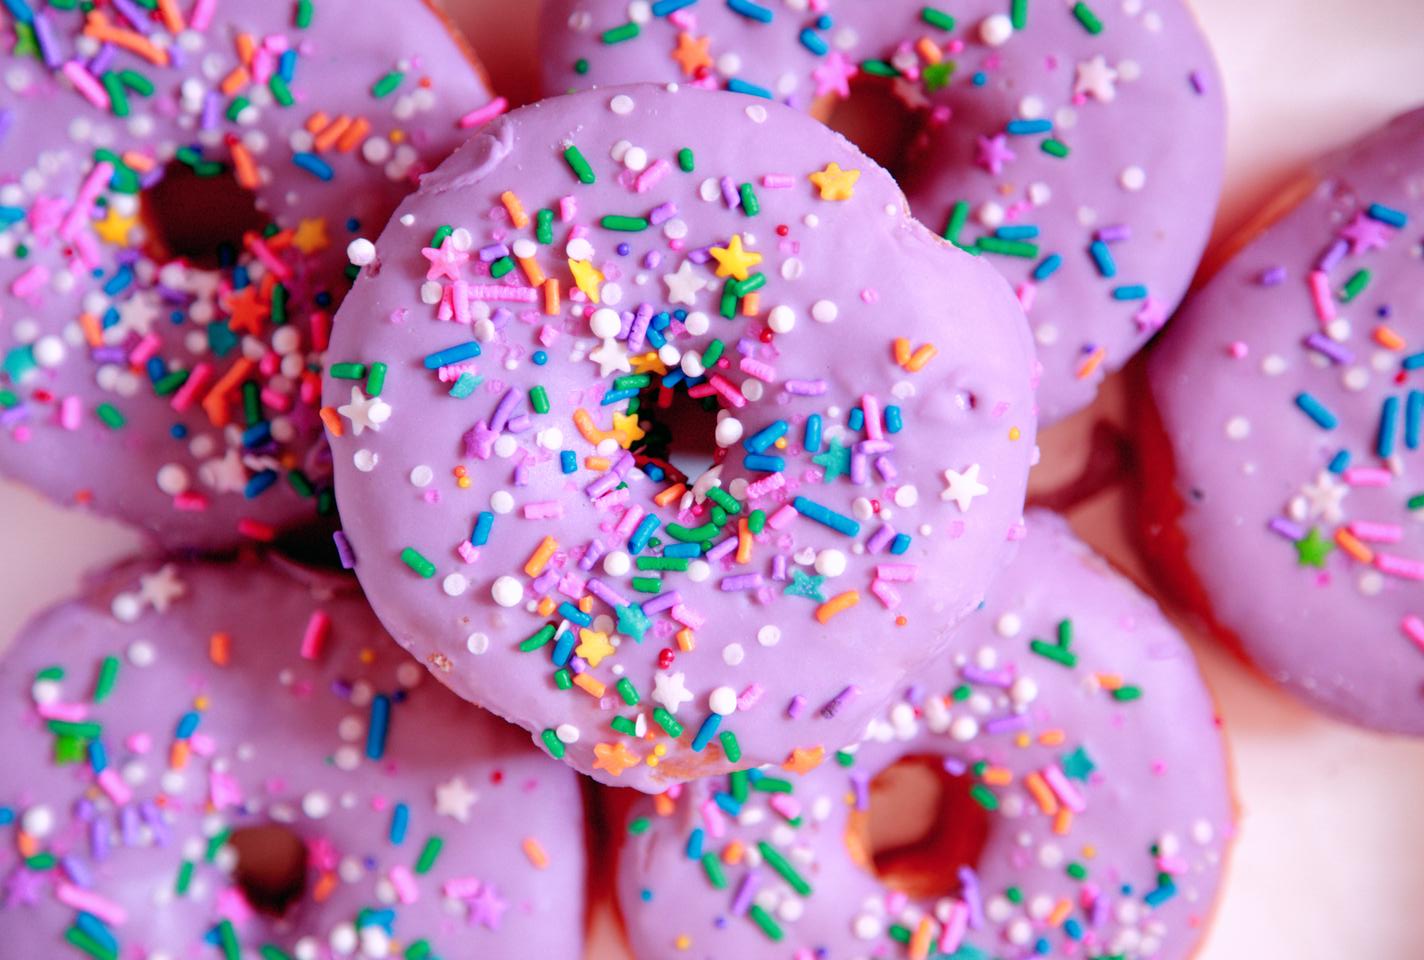 Eat Your Way Through the Rainbow at This 🍰 Desserts-Only Cafe to Find Out If You’re a 🐶 Dog or 🐱 Cat Person Doughnut